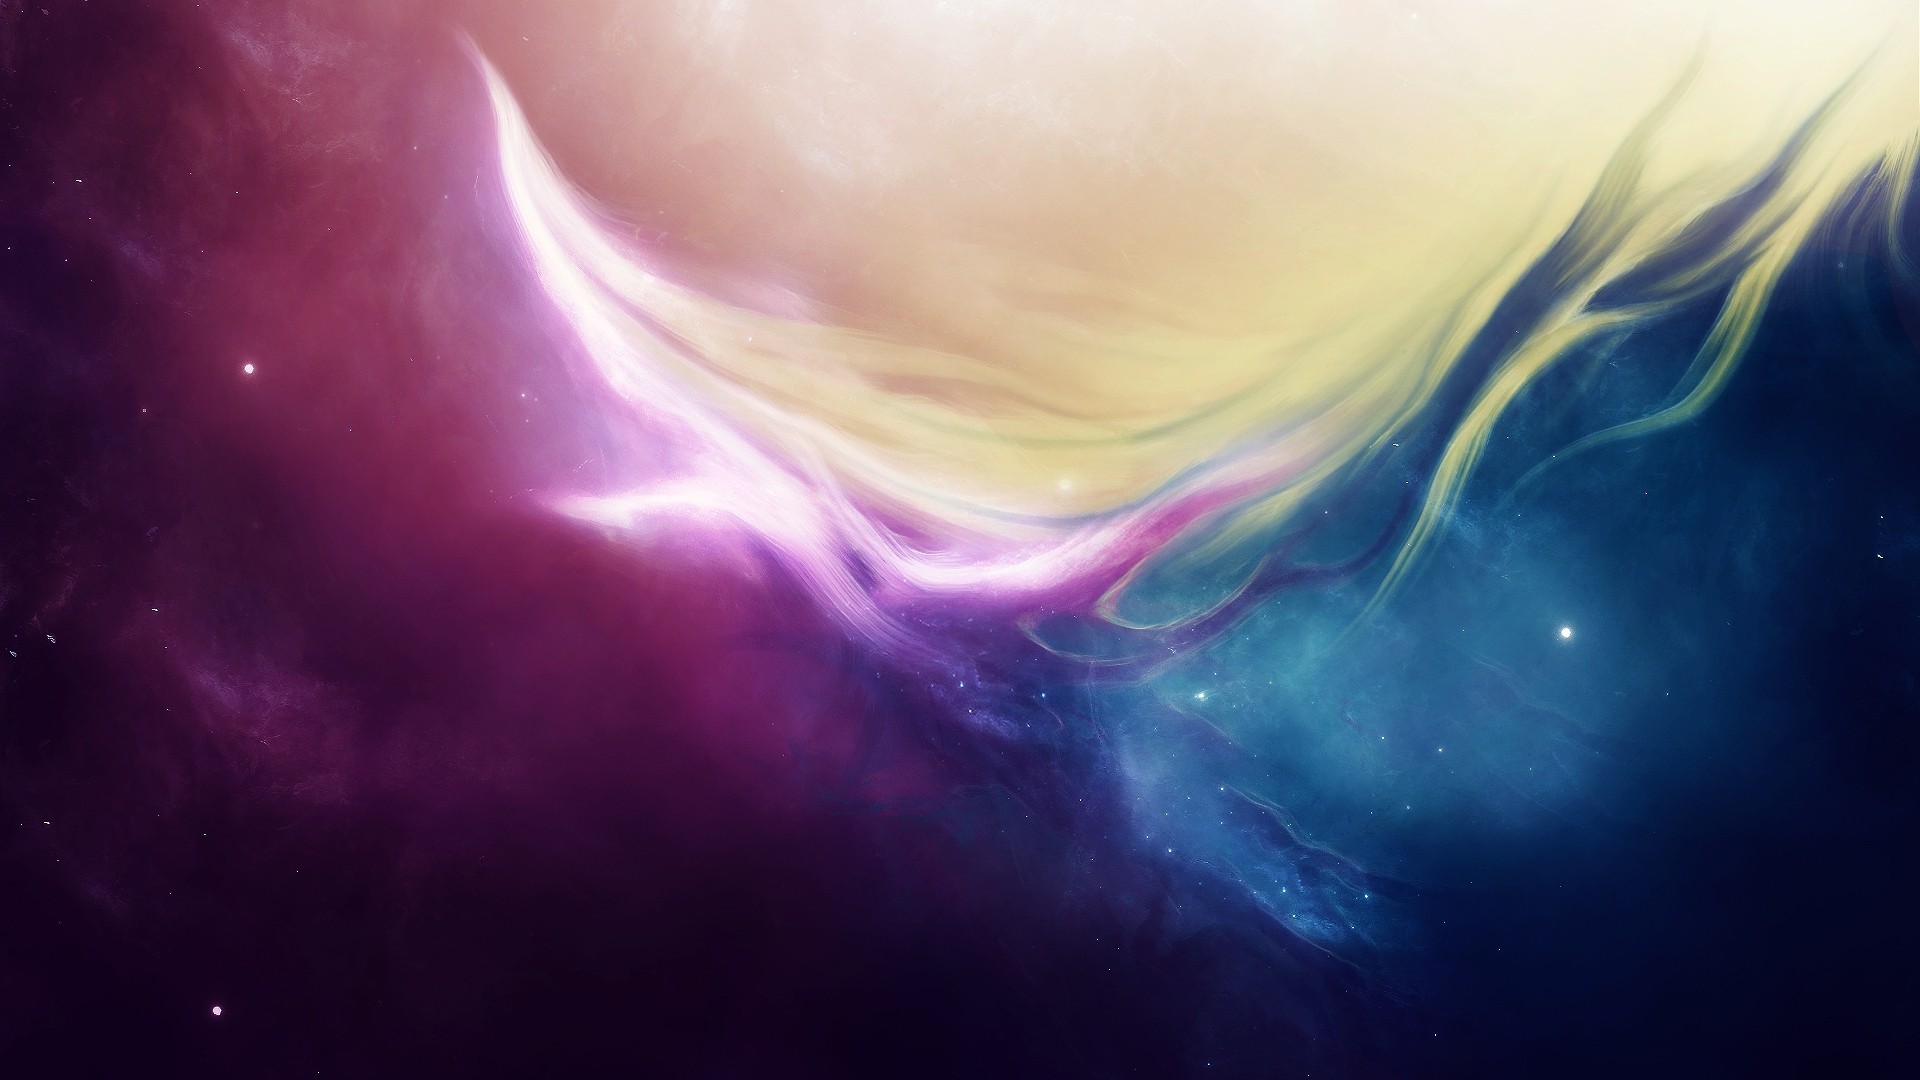 colorful, Space Art, Artwork, Abstract, Nebula, Space Wallpaper